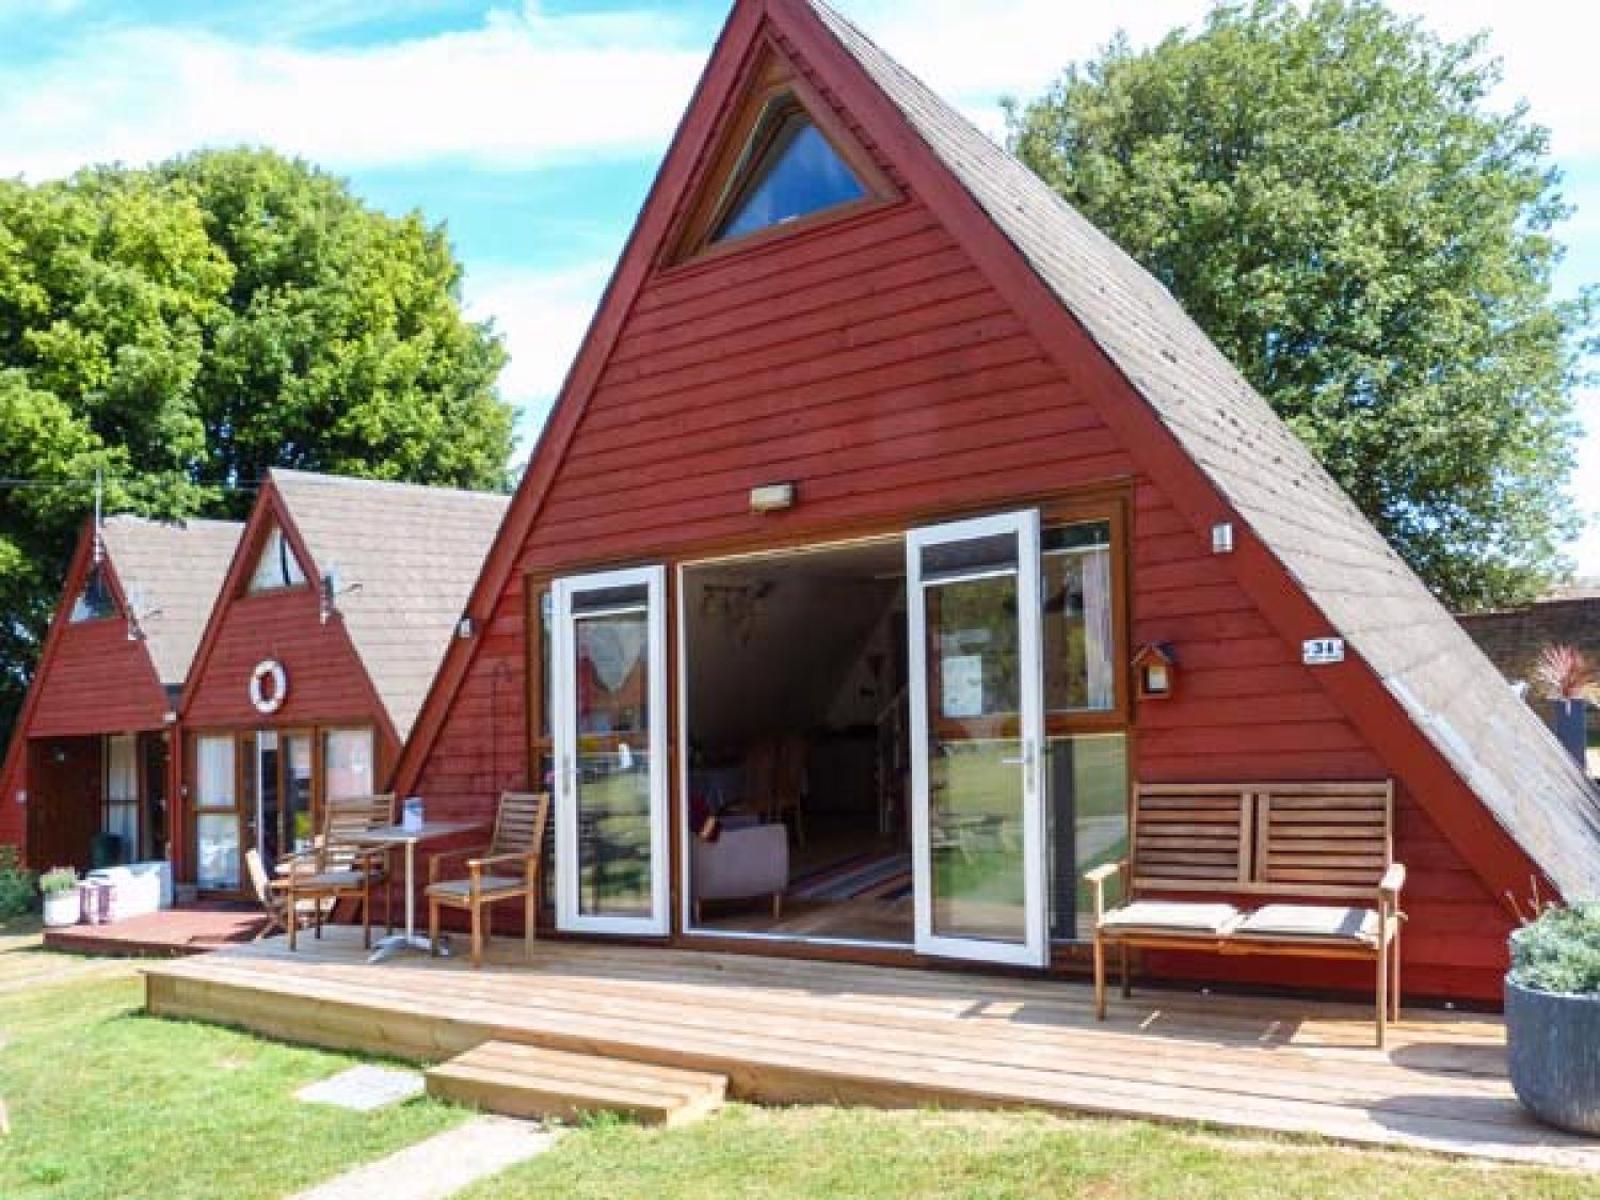 Sykes Holiday Cottages, Deal, kent